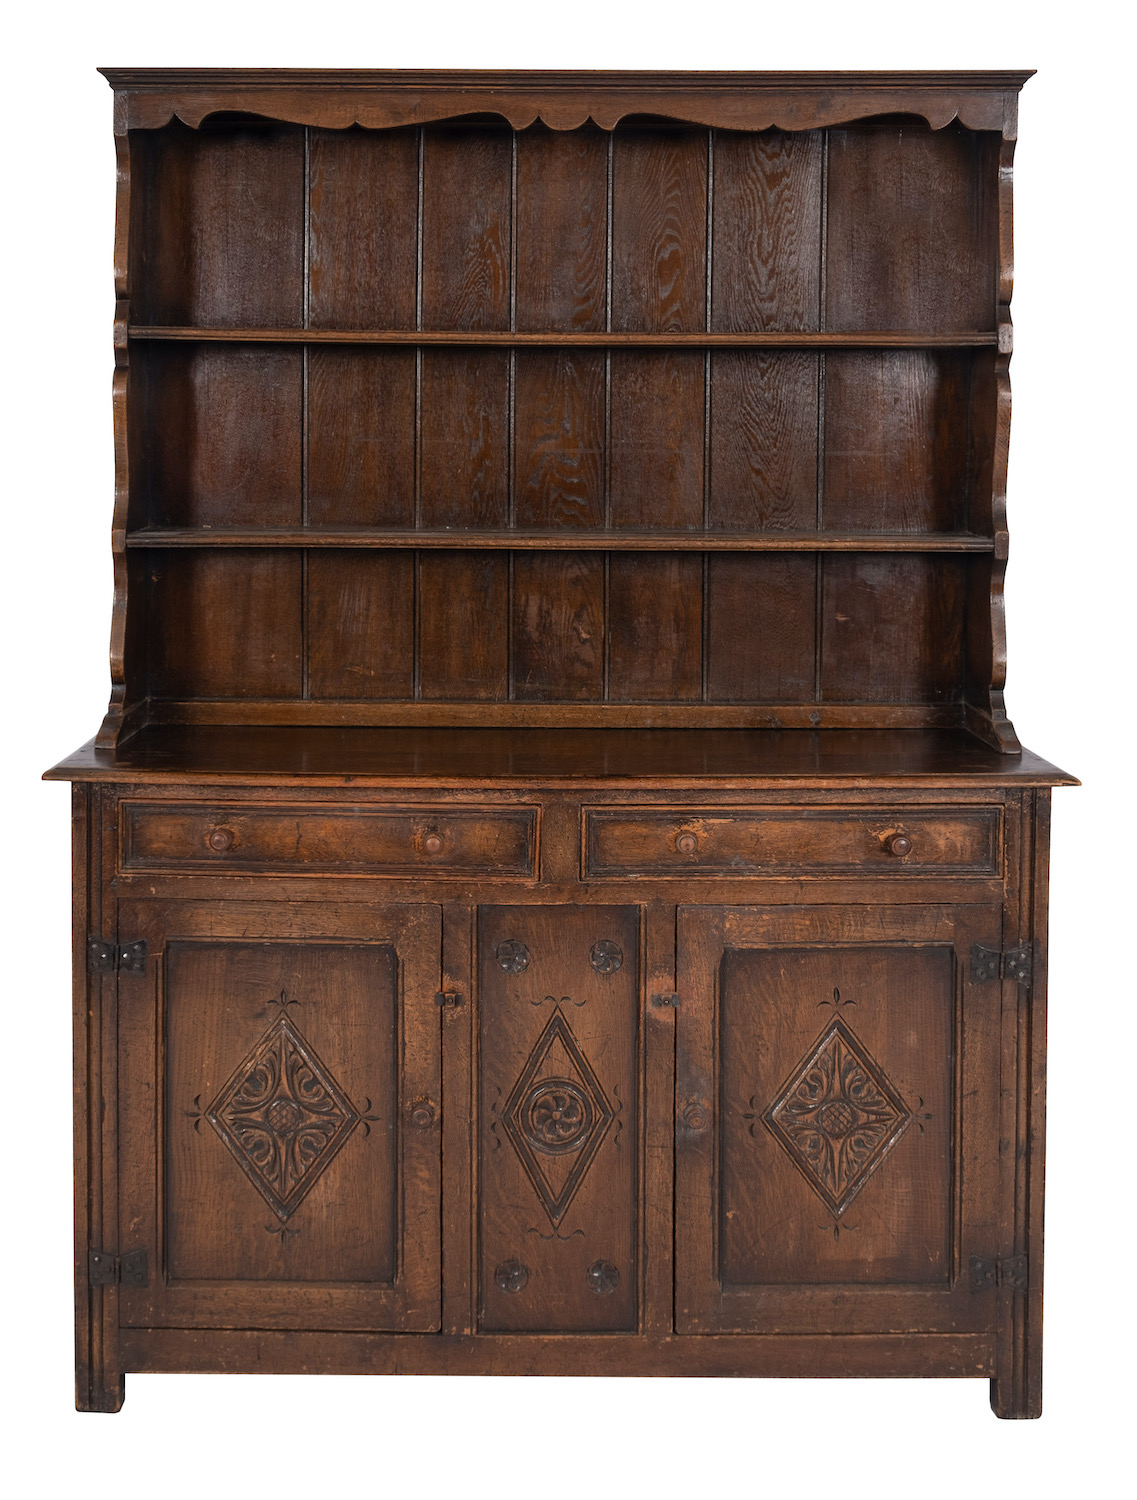 Timed Auction: Furniture, Works of Art, Pictures, Ceramics, Books, Sporting & Collectors